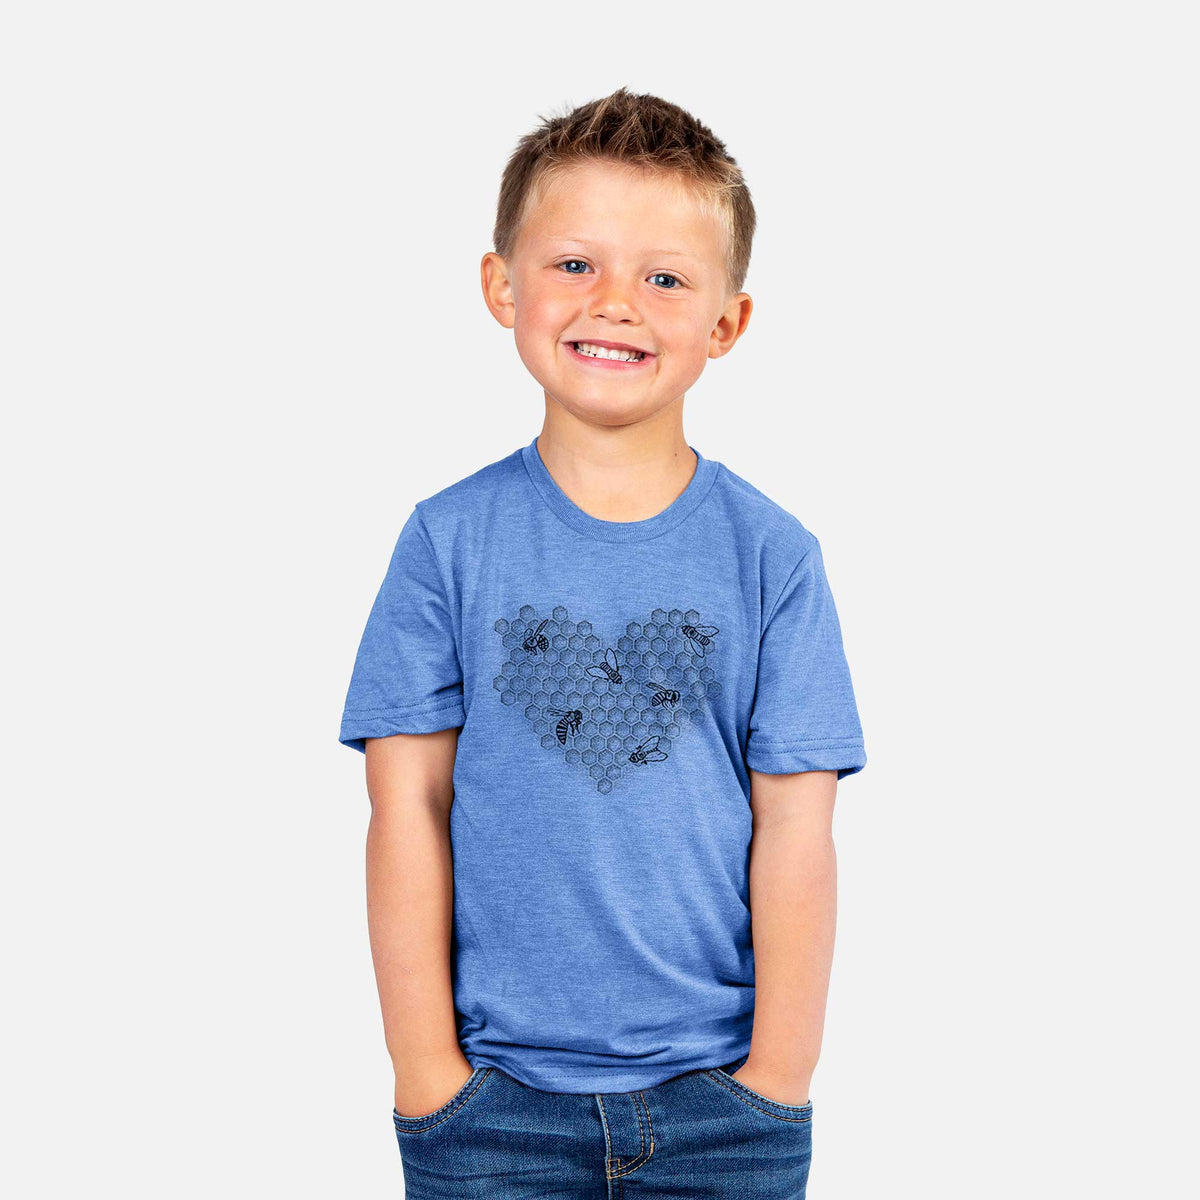 Honeycomb Heart with Bees - Kids Shirt